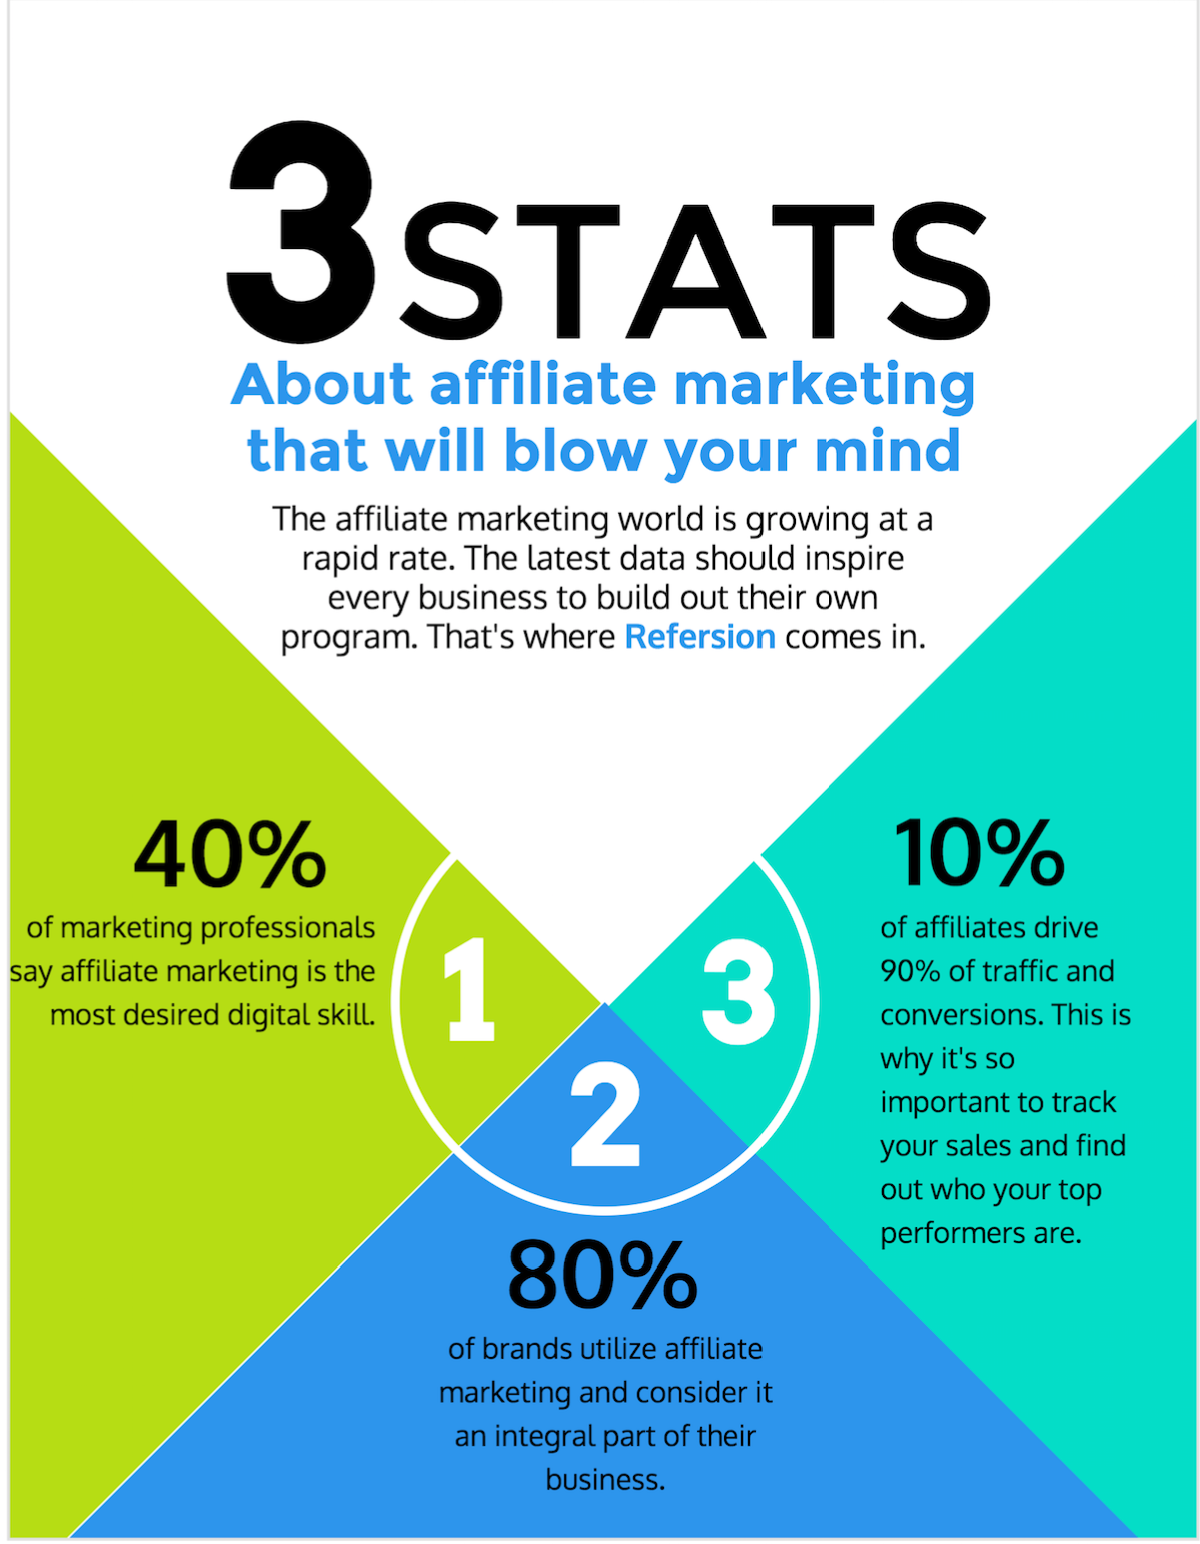 Affiliate Marketing in China: Affiliate Networks and Programs